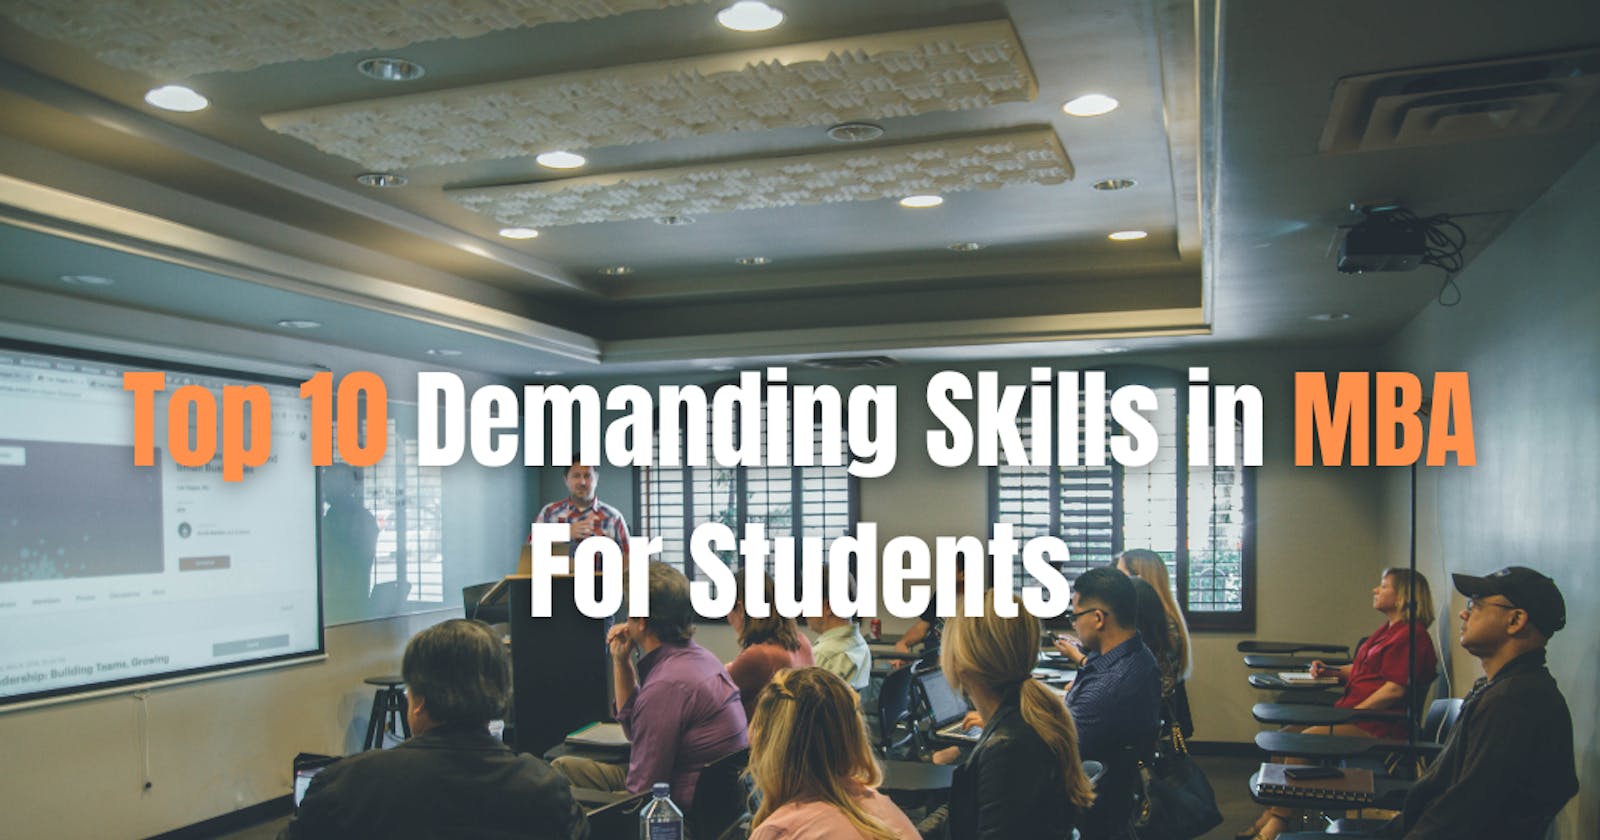 Top 10 Demanding Skills in MBA For Students